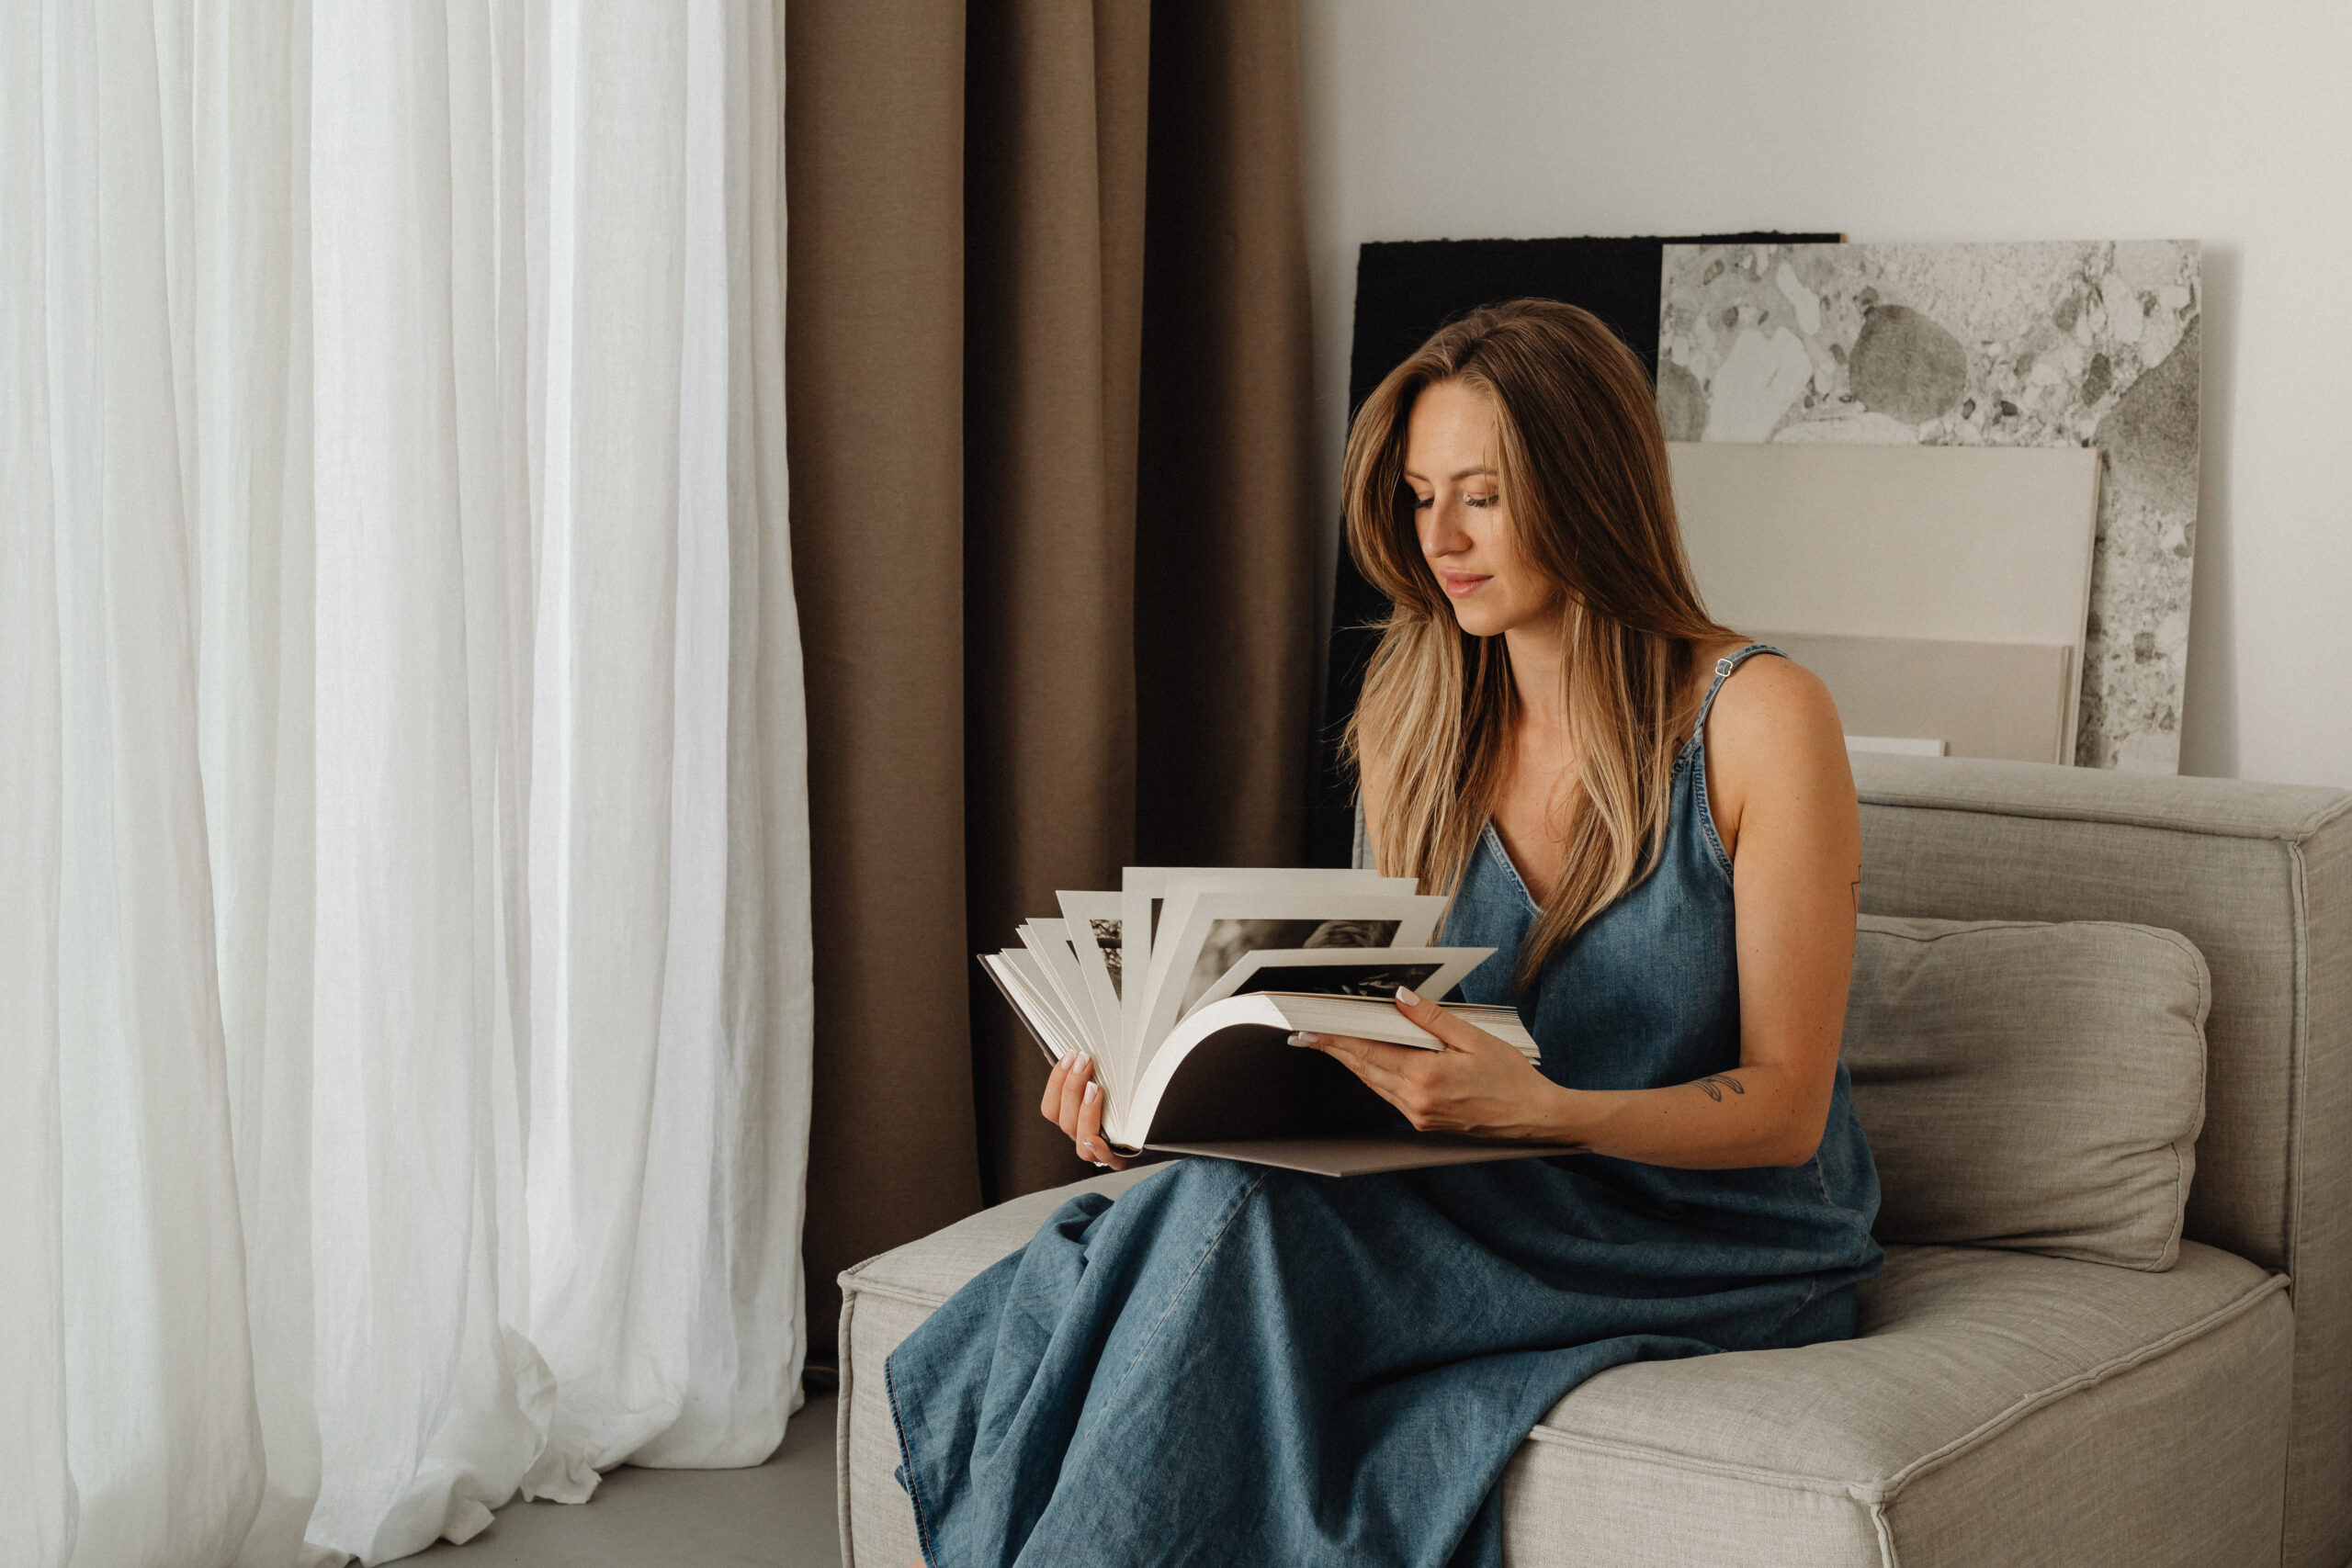 Woman sitting on her bed with a blue dress on, flipping through a book. Eating disorder triggers are hard, but with these tips from Manhattan therapists, you can over them.